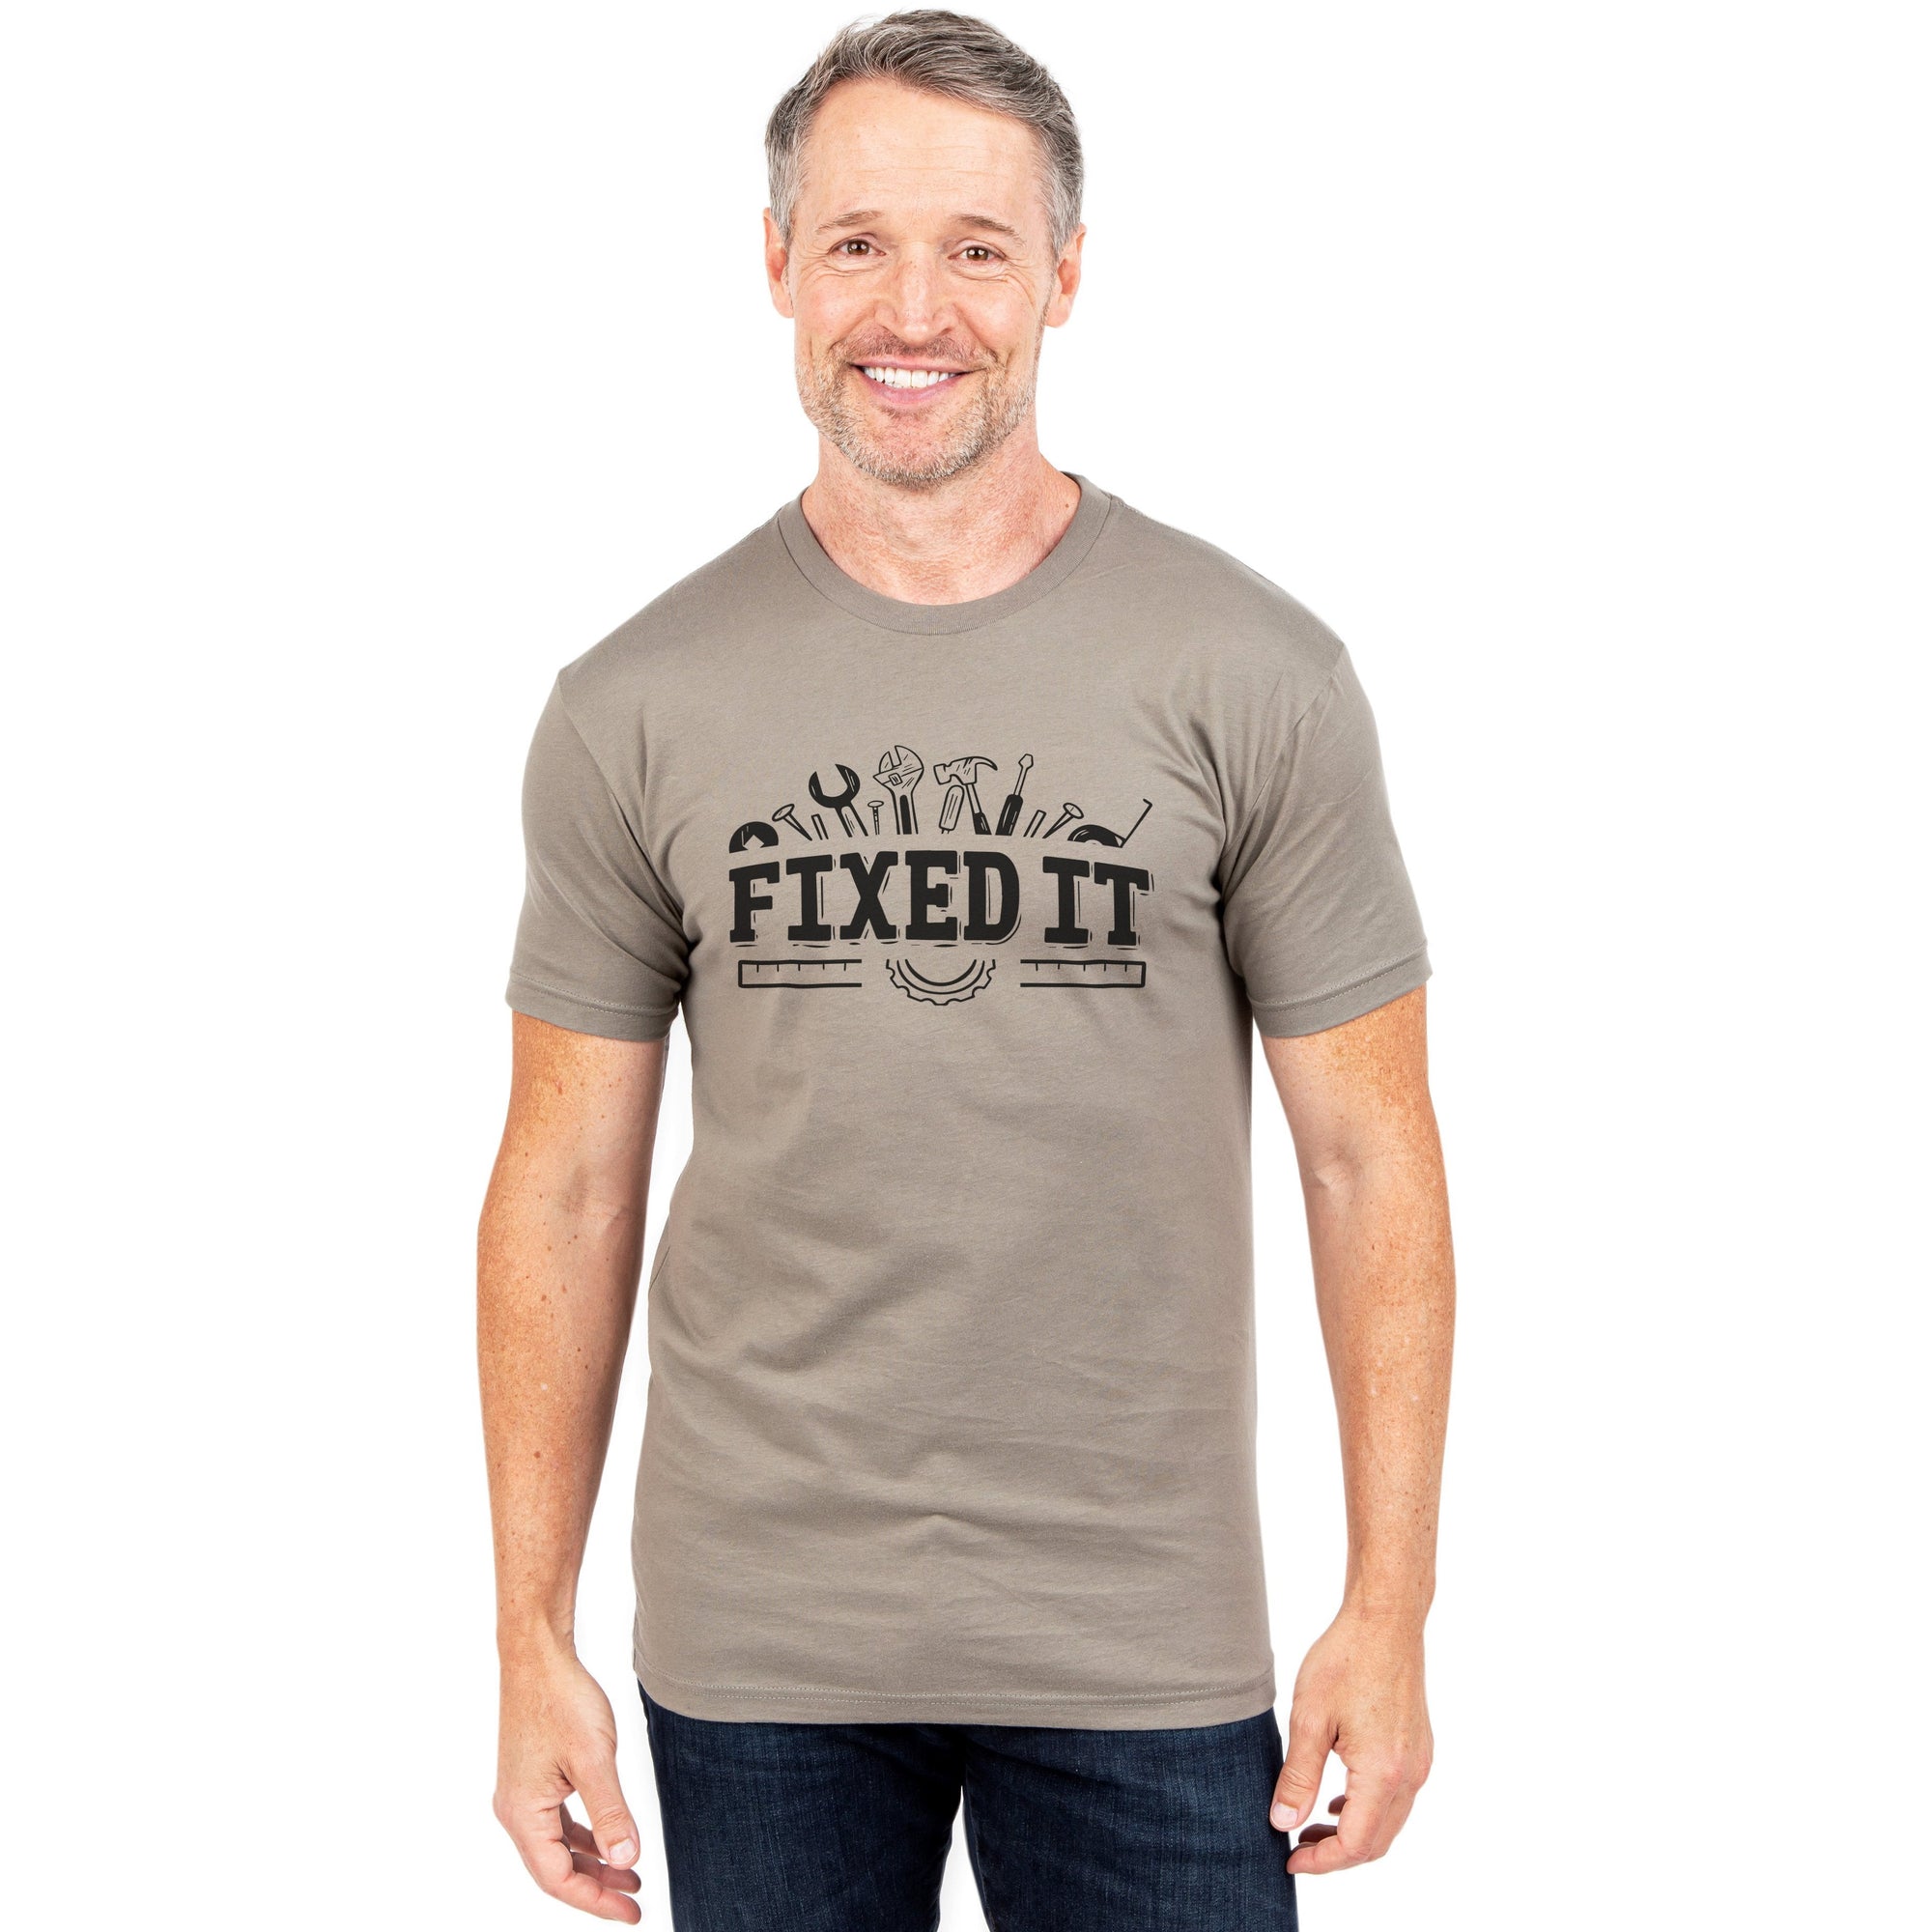 Fixed It Military Grey Printed Graphic Men's Crew T-Shirt Tee Model